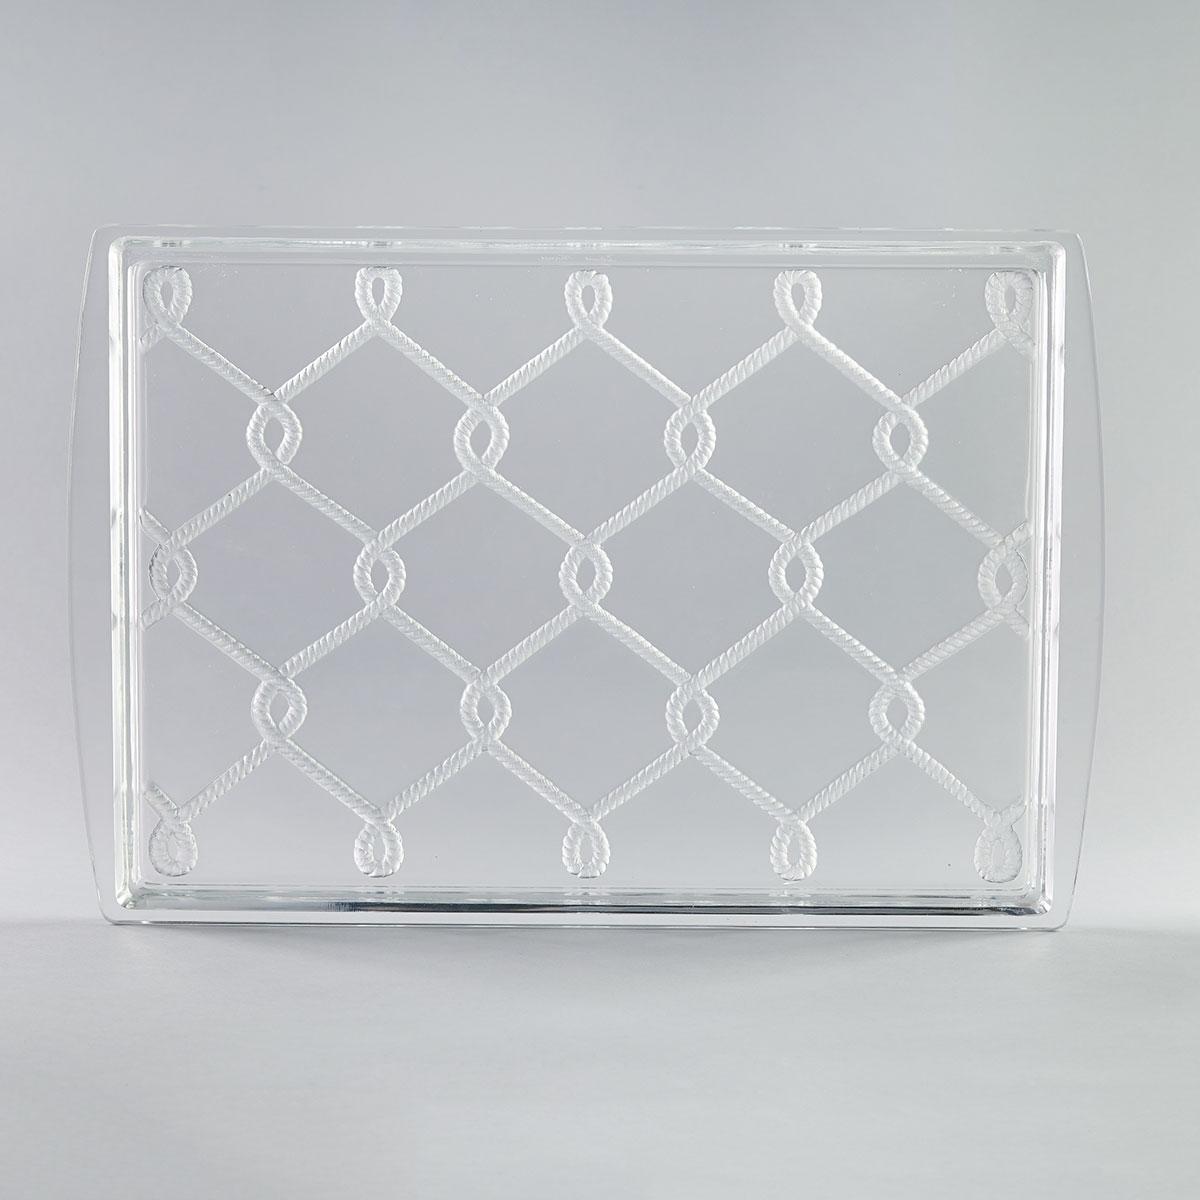 ‘Saint-Malo’, Lalique Moulded and Partly Frosted Glass Rectangular Tray, post-1945